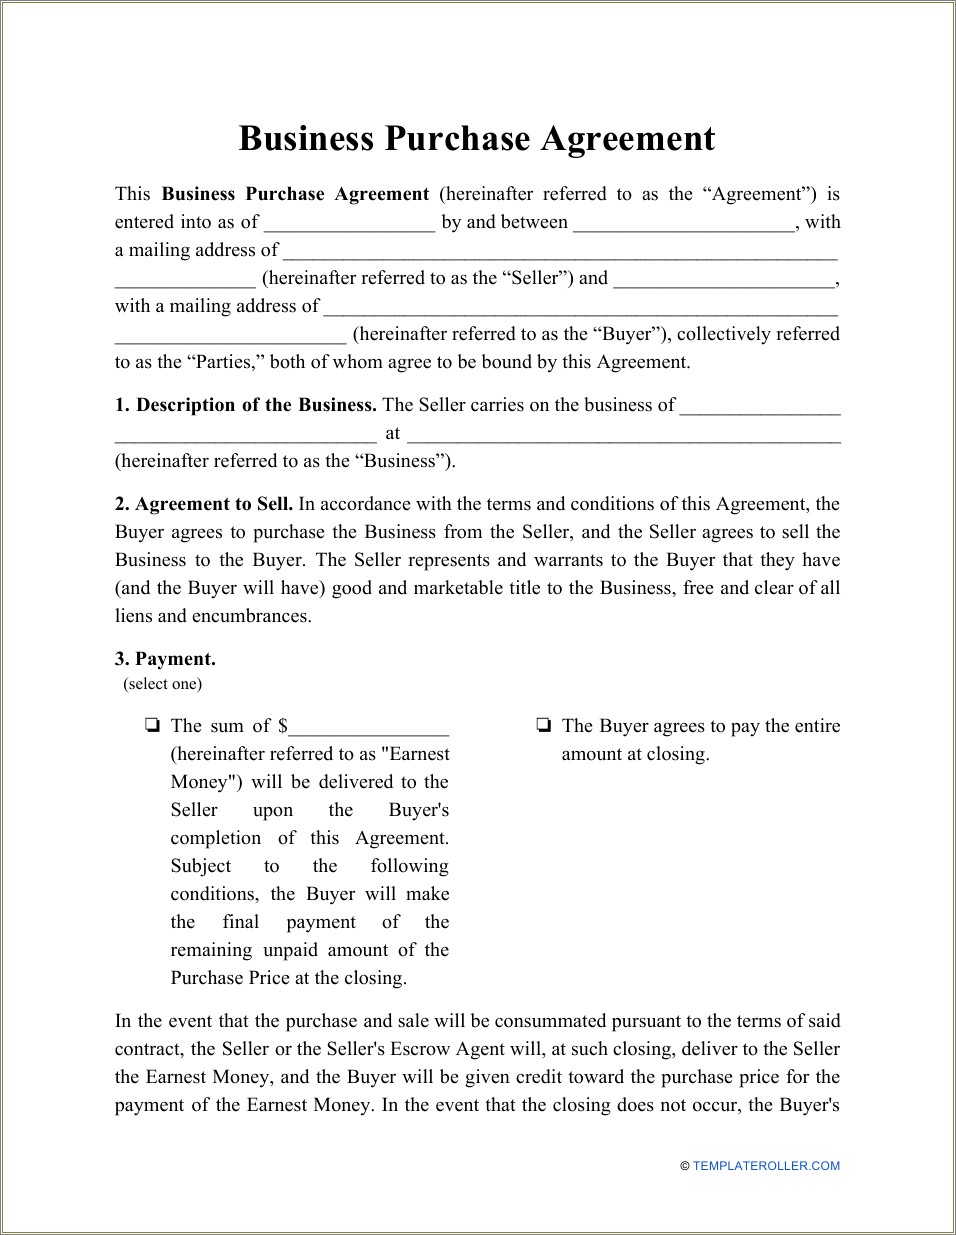 Business Purchase Agreement Template Free Download